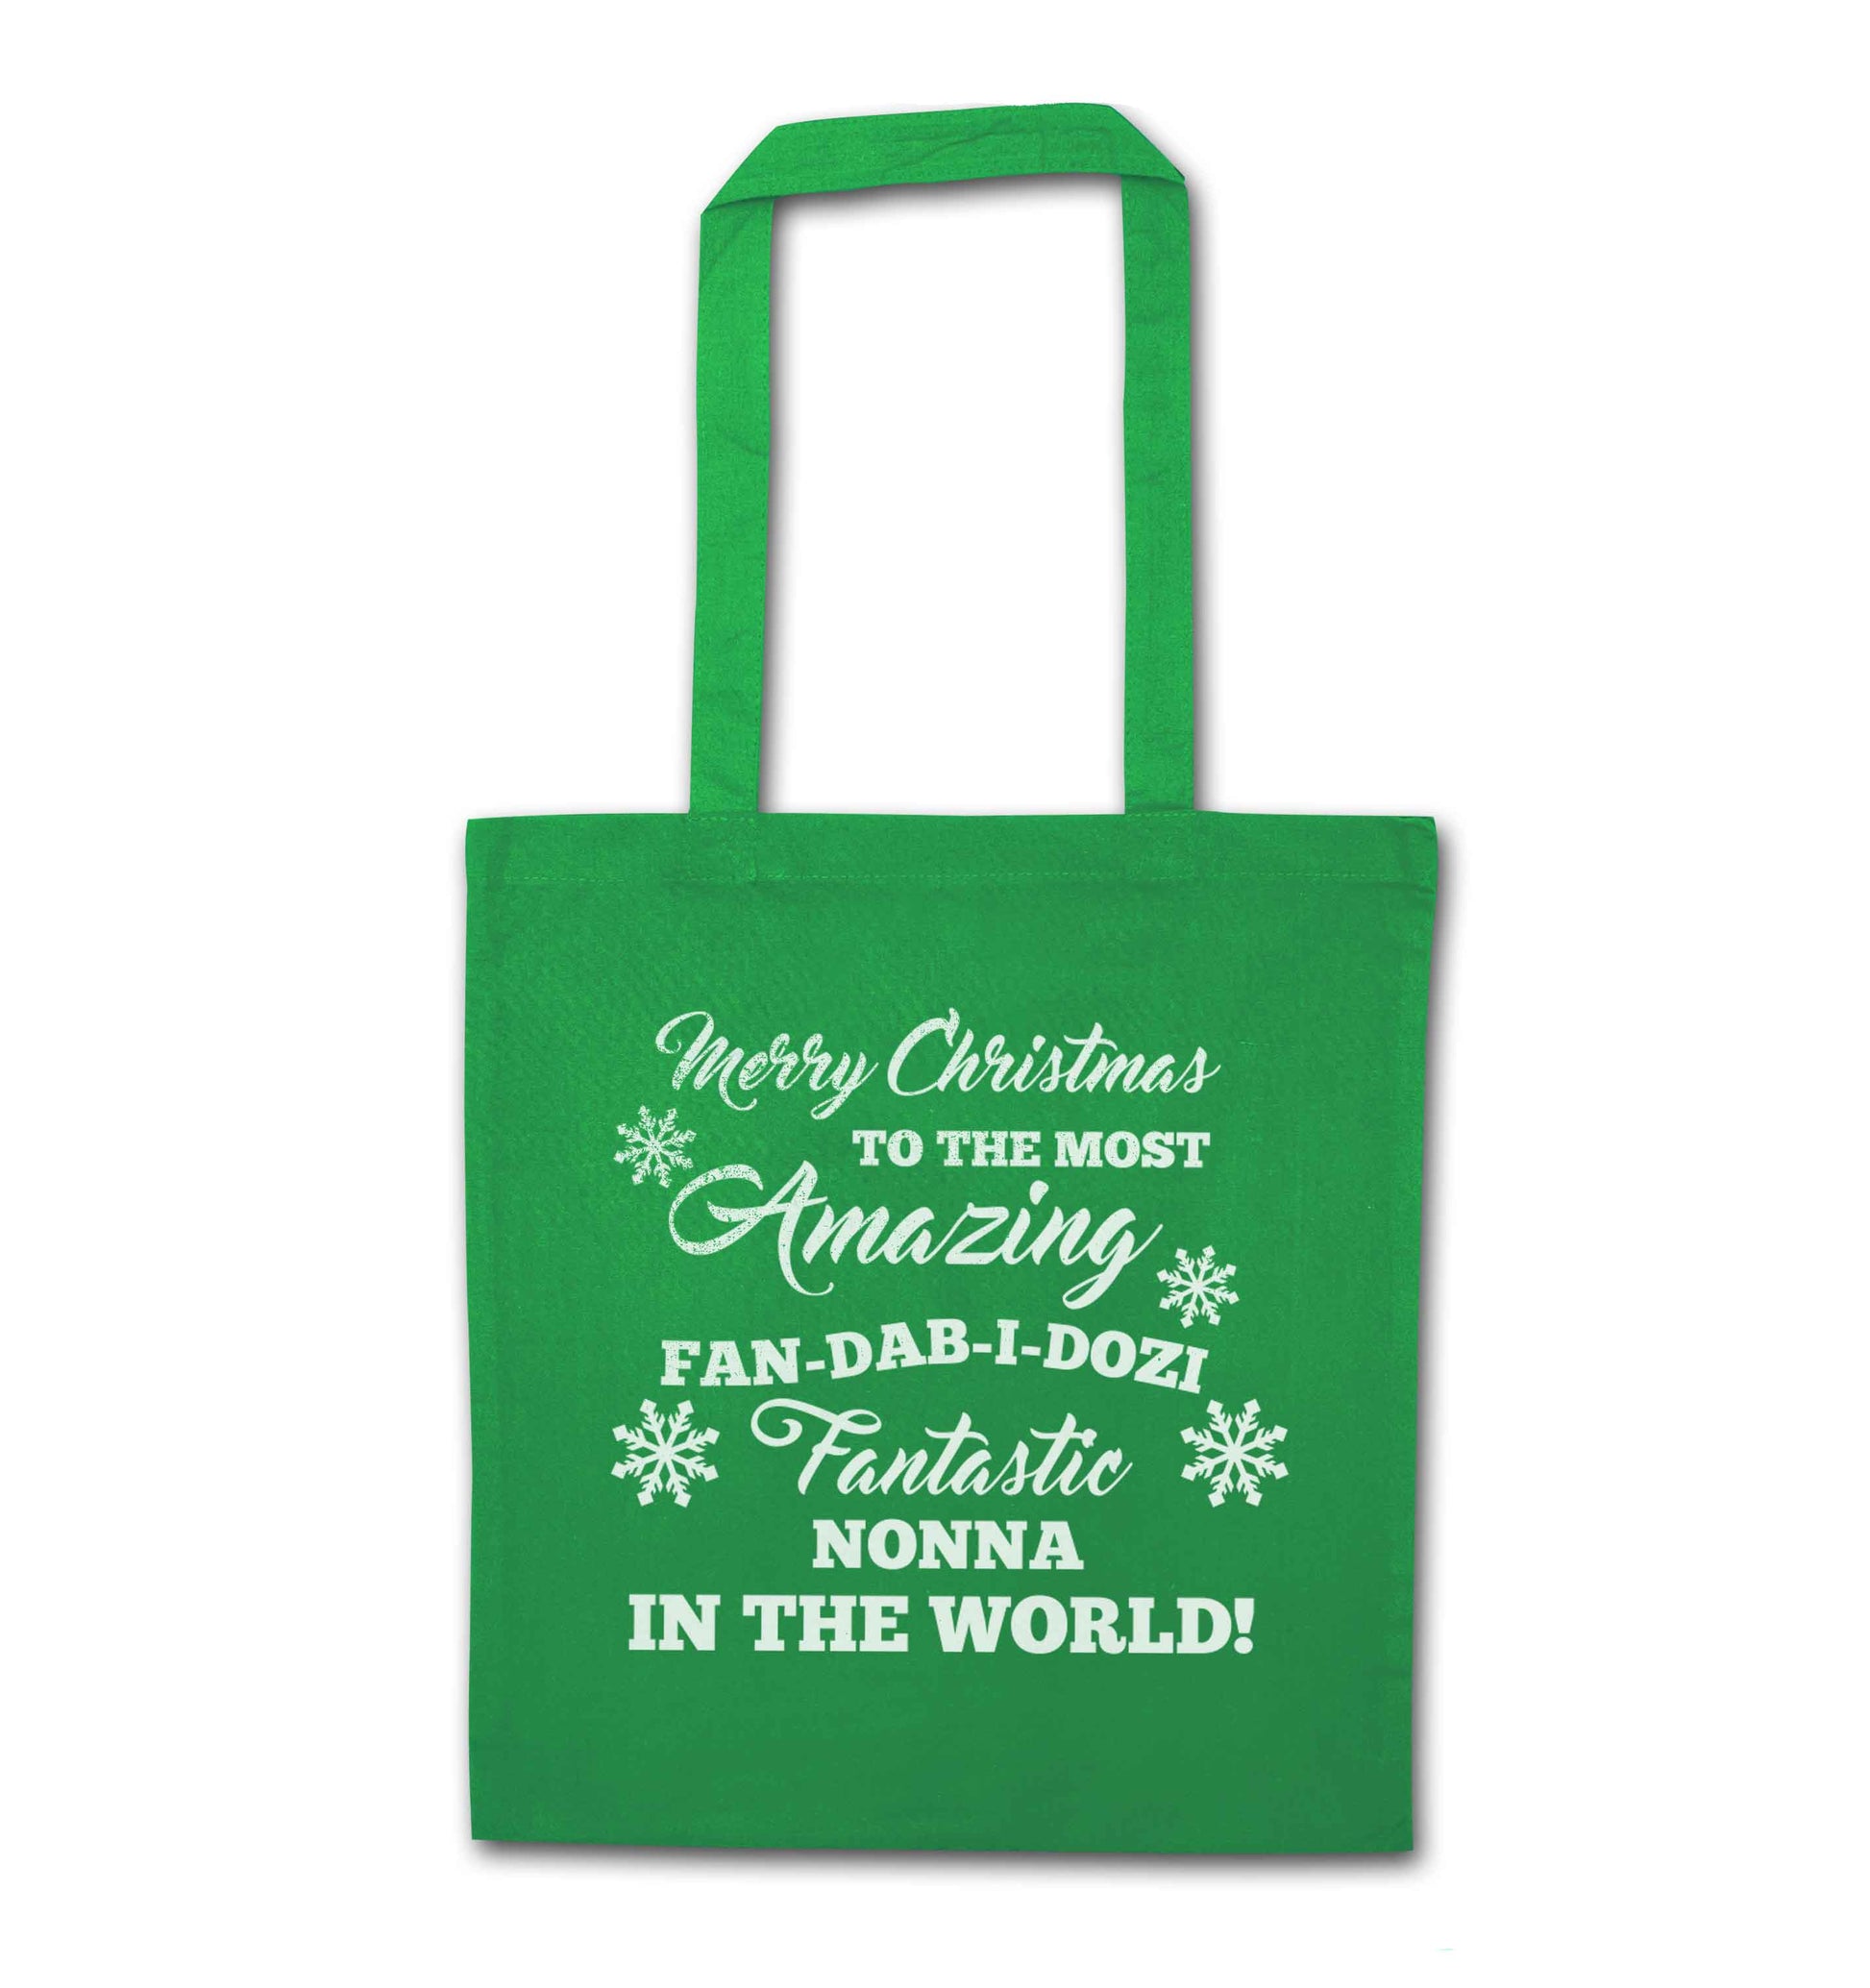 Merry Christmas to the most amazing fan-dab-i-dozi fantasic Nonna in the world green tote bag